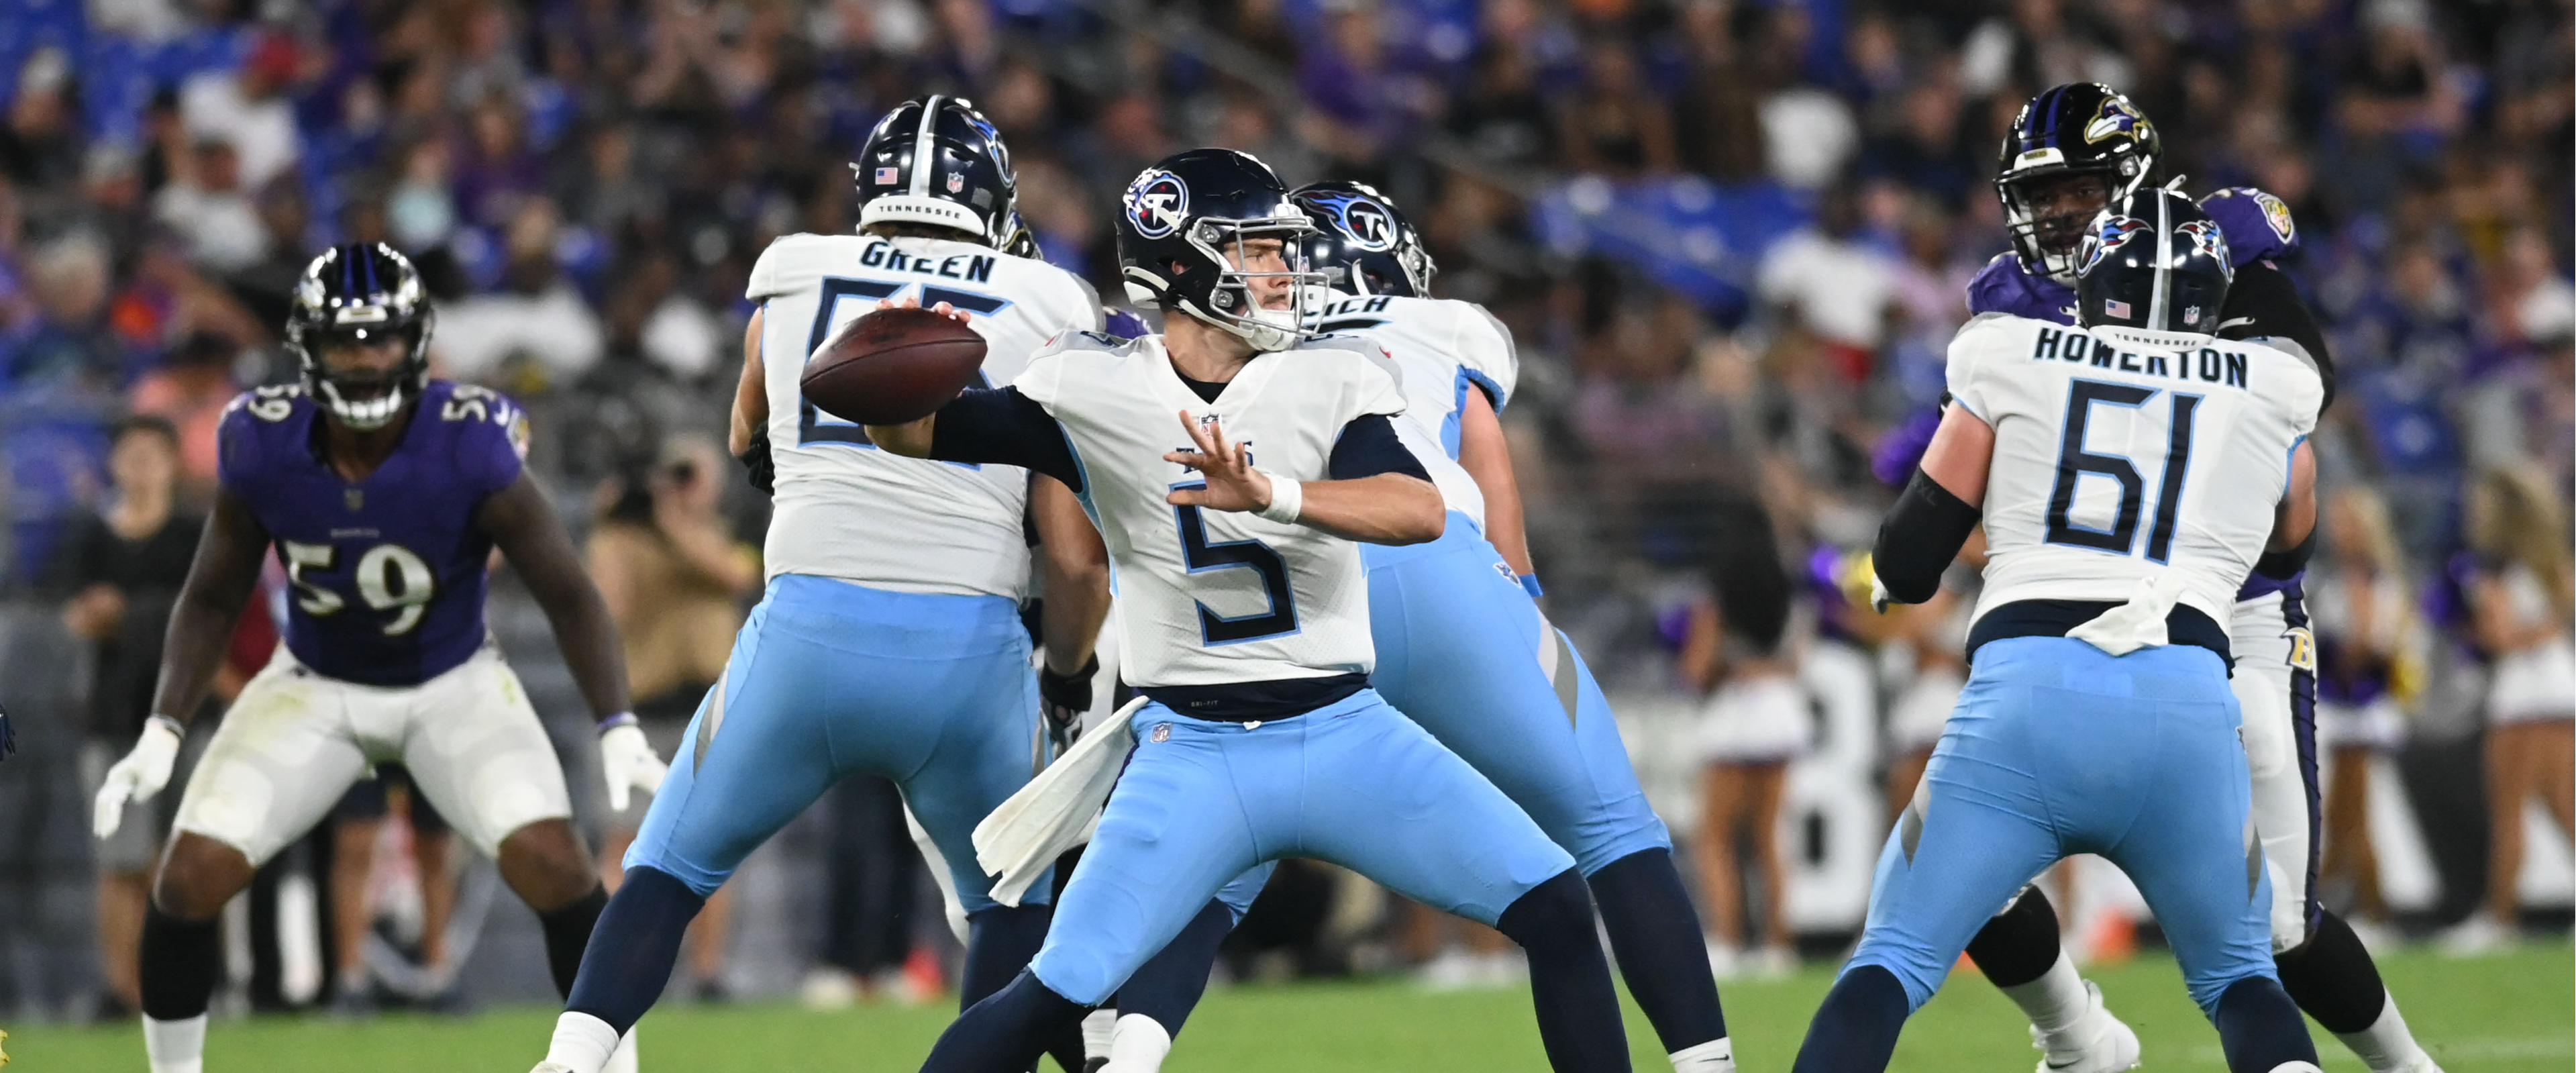 Titans: Saturday could be Logan Woodside's last chance to earn a spot on the roster